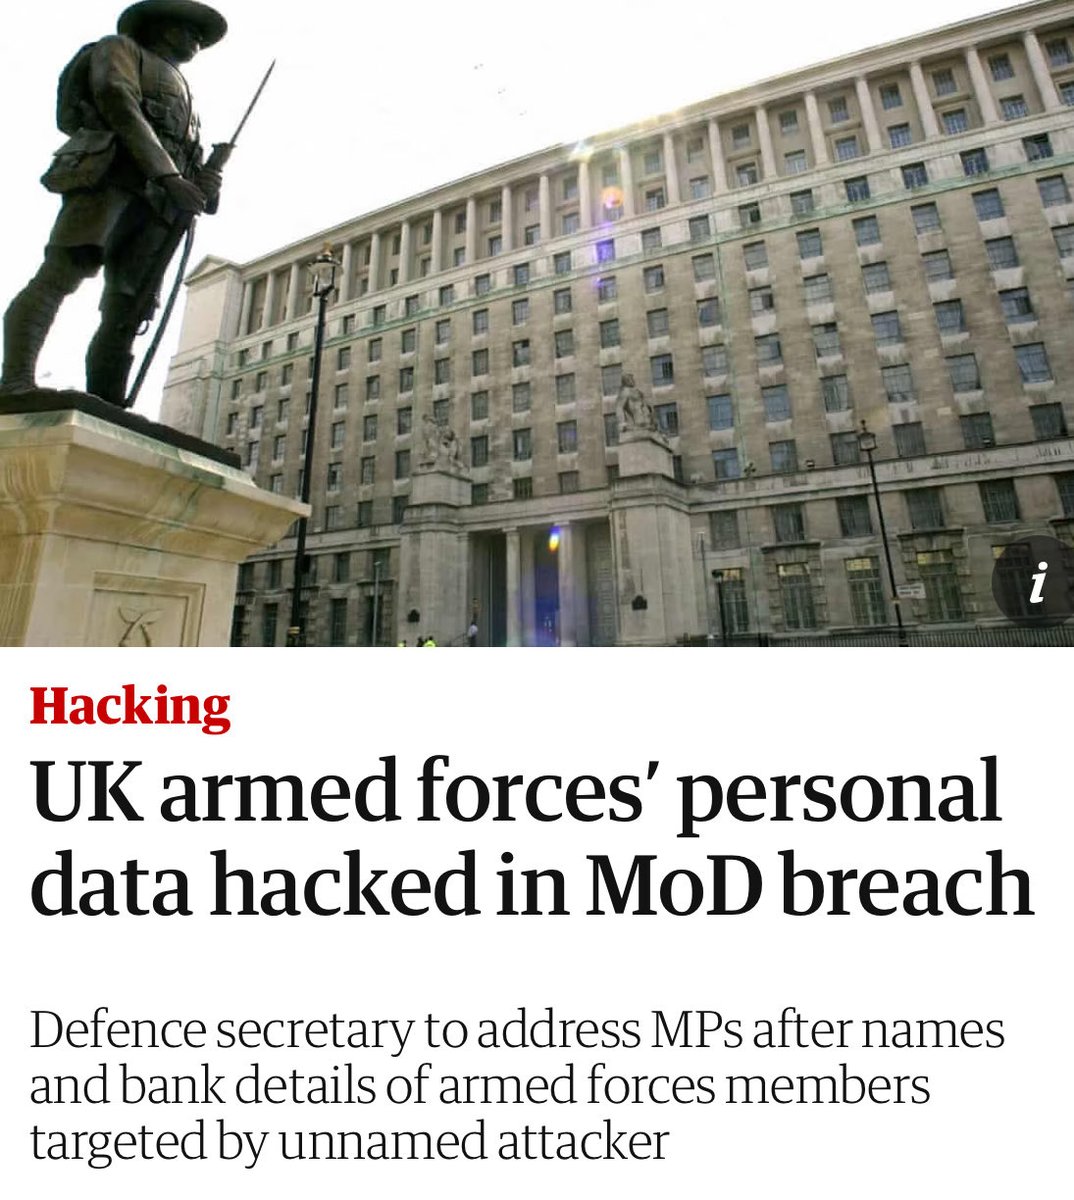 The MoD has been hacked
The Govt is looking for a scapegoat
SSCL (Shared Services Connected Ltd) is the contractor
SSCL is a subsidiary of the Paris-based tech company Sopra Steria
Up to 272,000 service personnel may have been hit by the data breach

#ToryCuts 
#ToryIncompetence